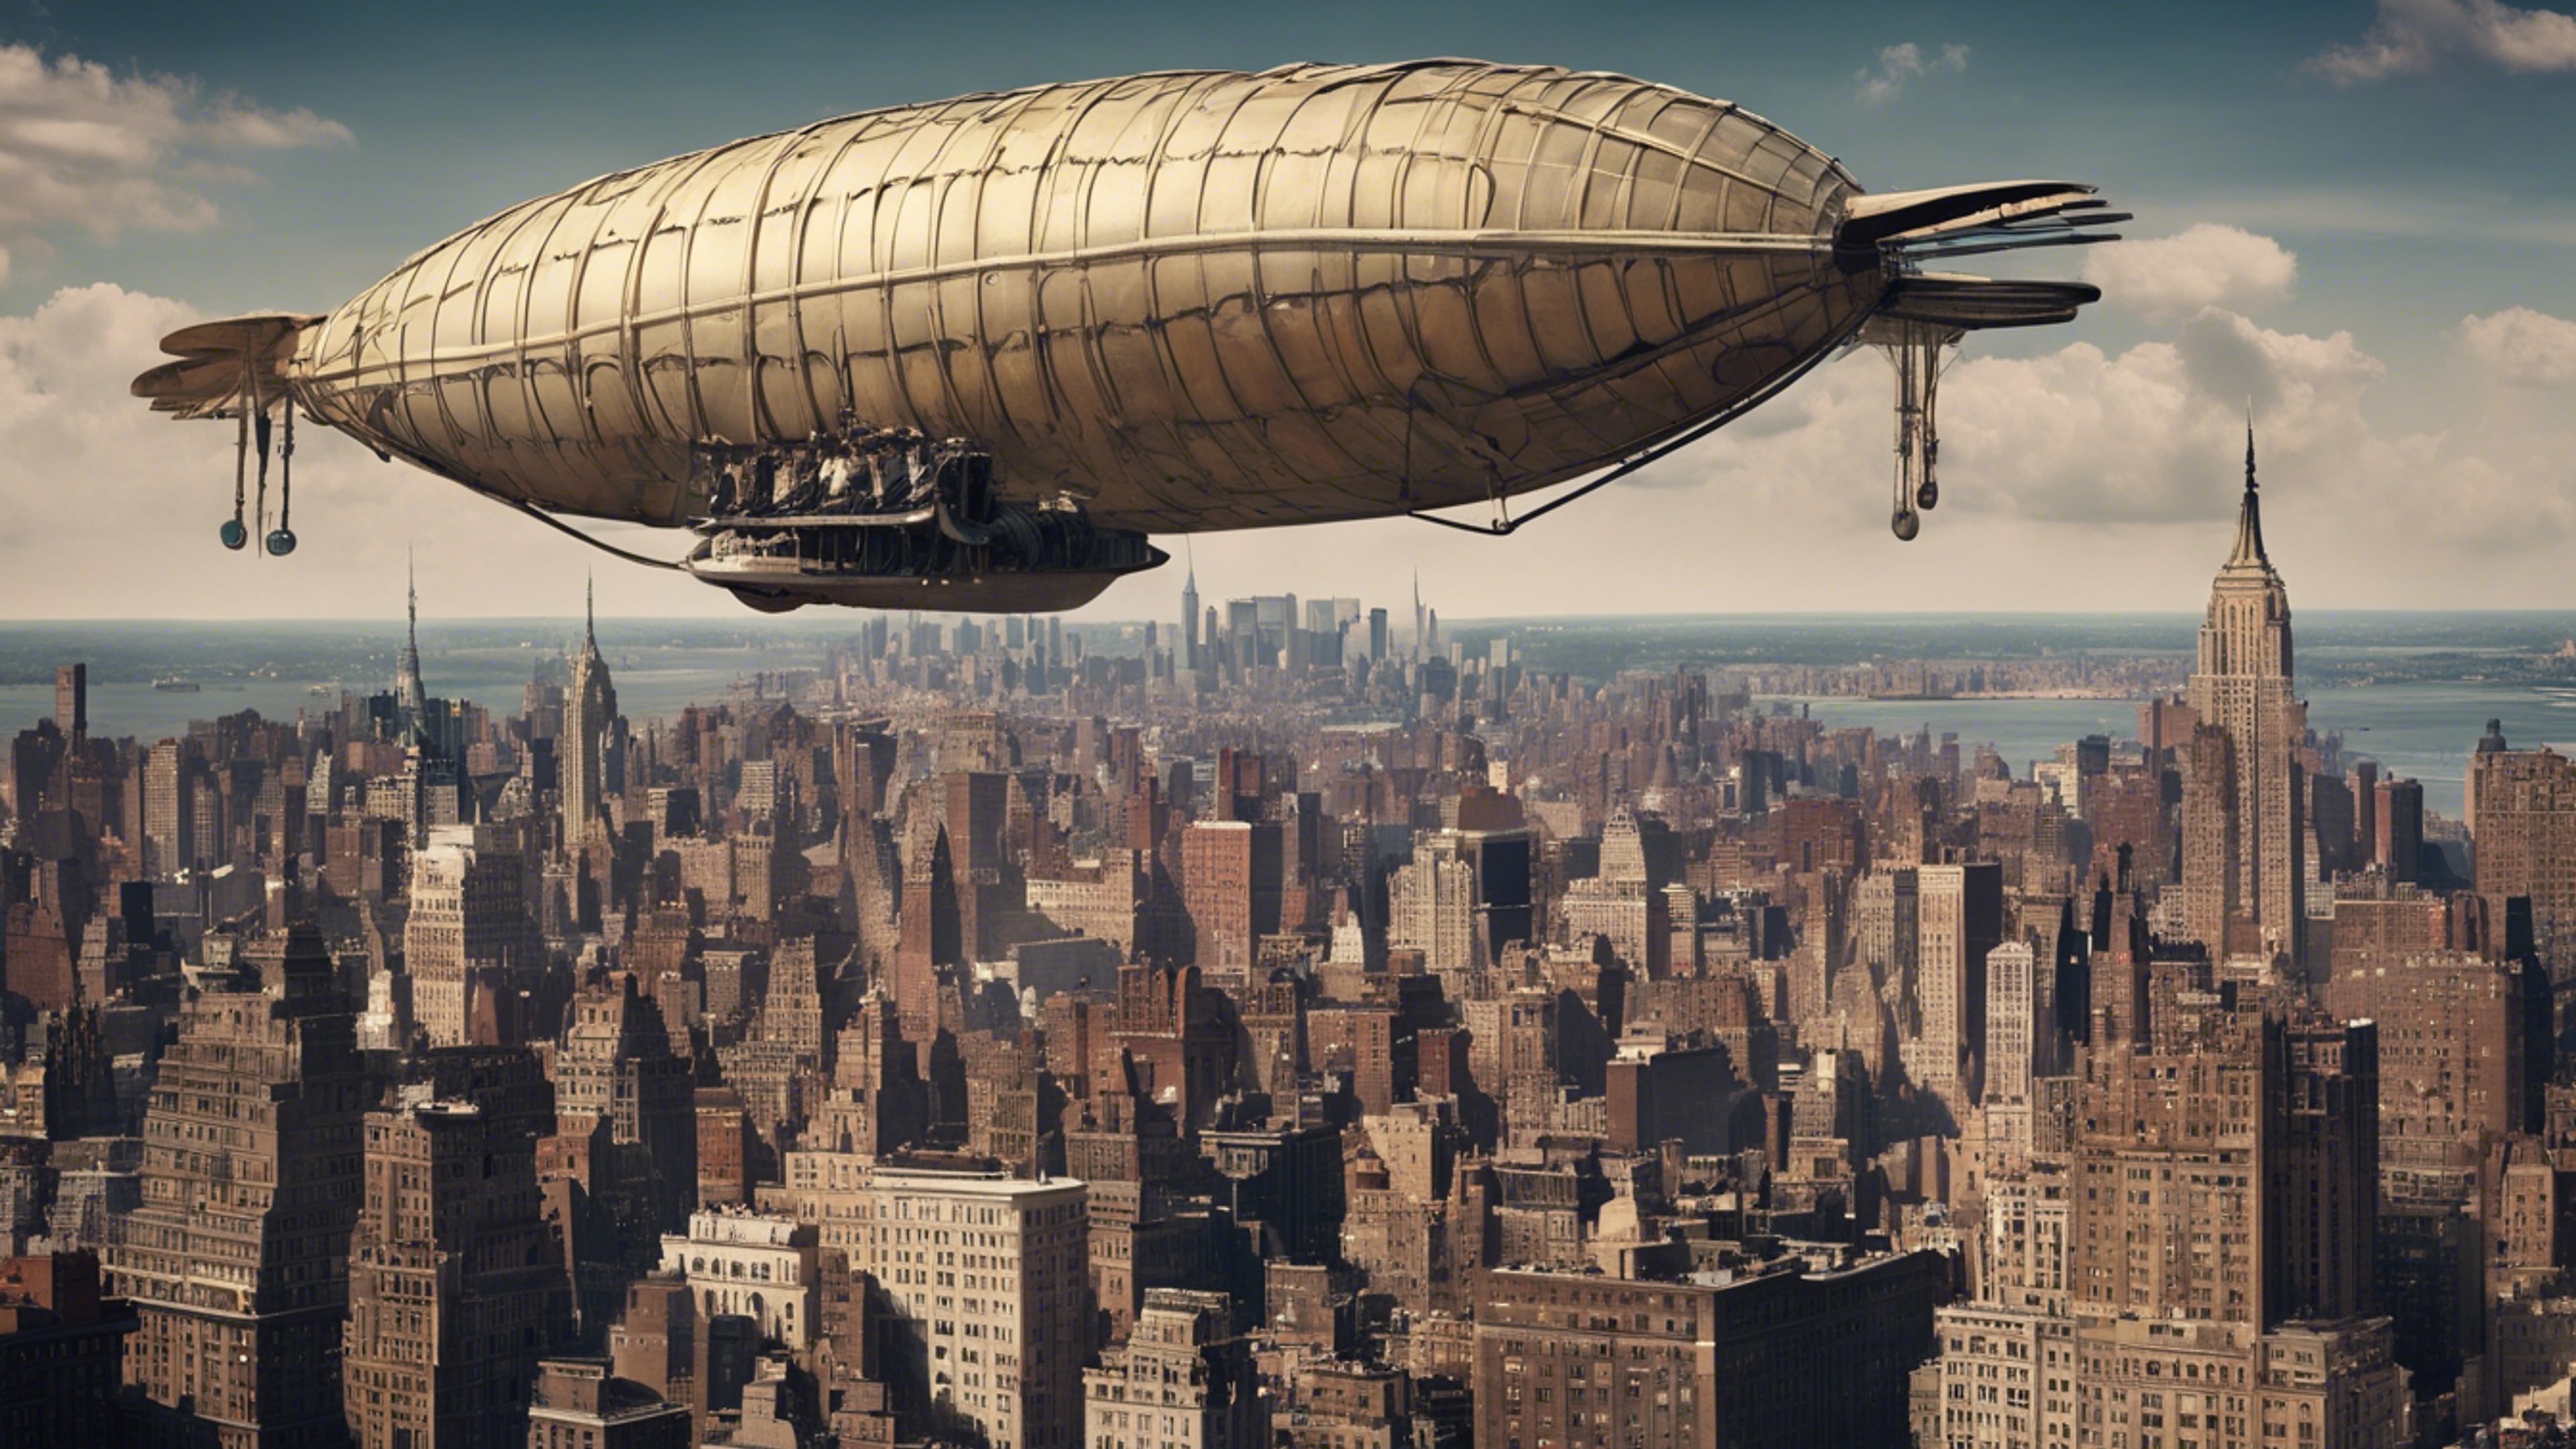 A nostalgic skyline view of 1920s New York City, peppered with zeppelins. Wallpaper[5c42609b28fb4c129601]